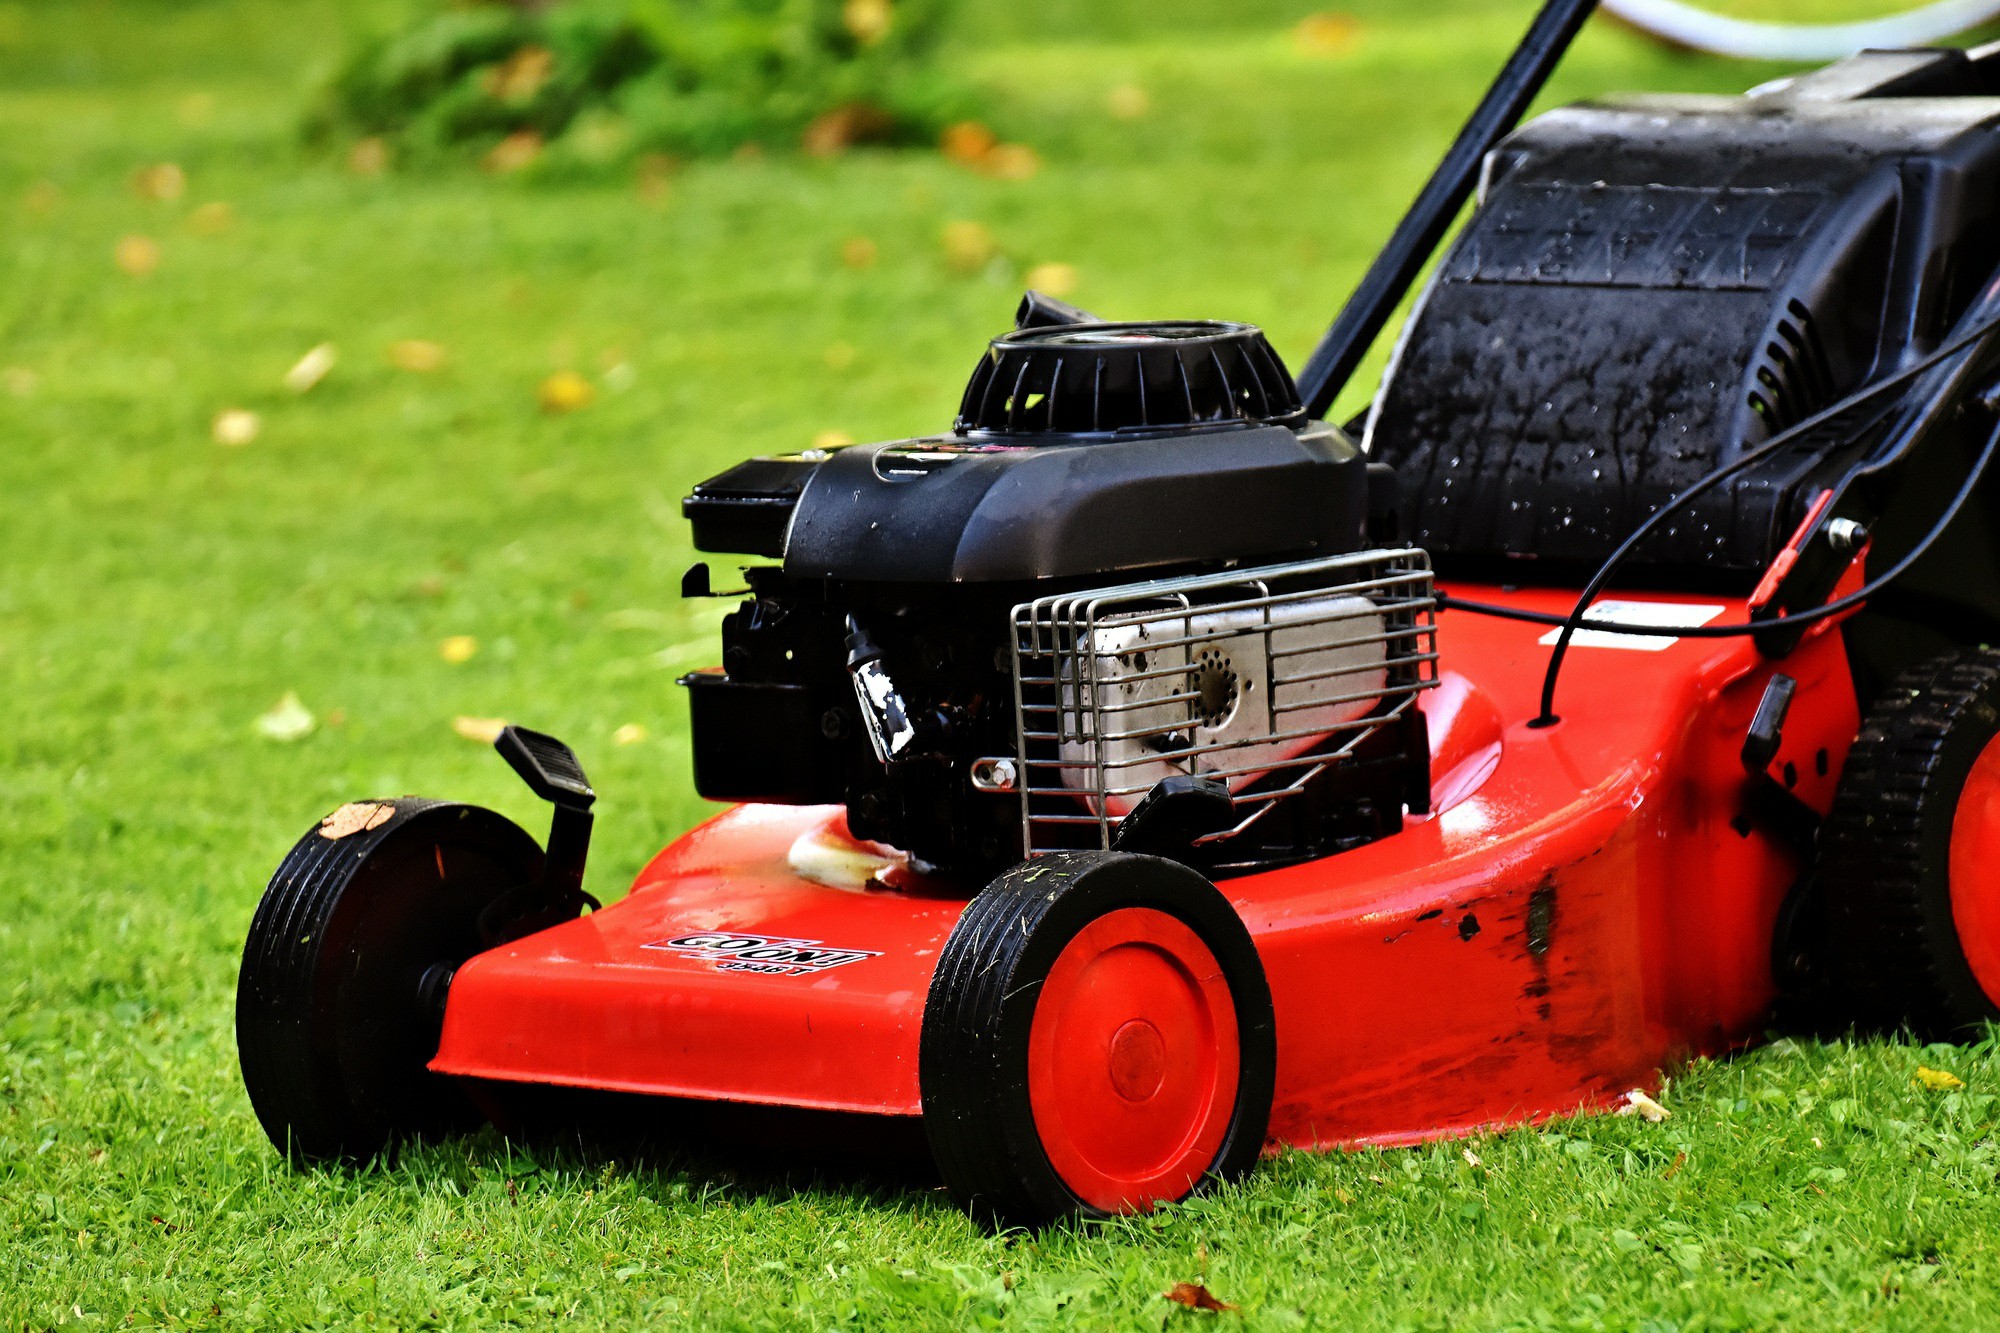 3 Undeniable Benefits of Hiring a Professional Lawn Mowing Service